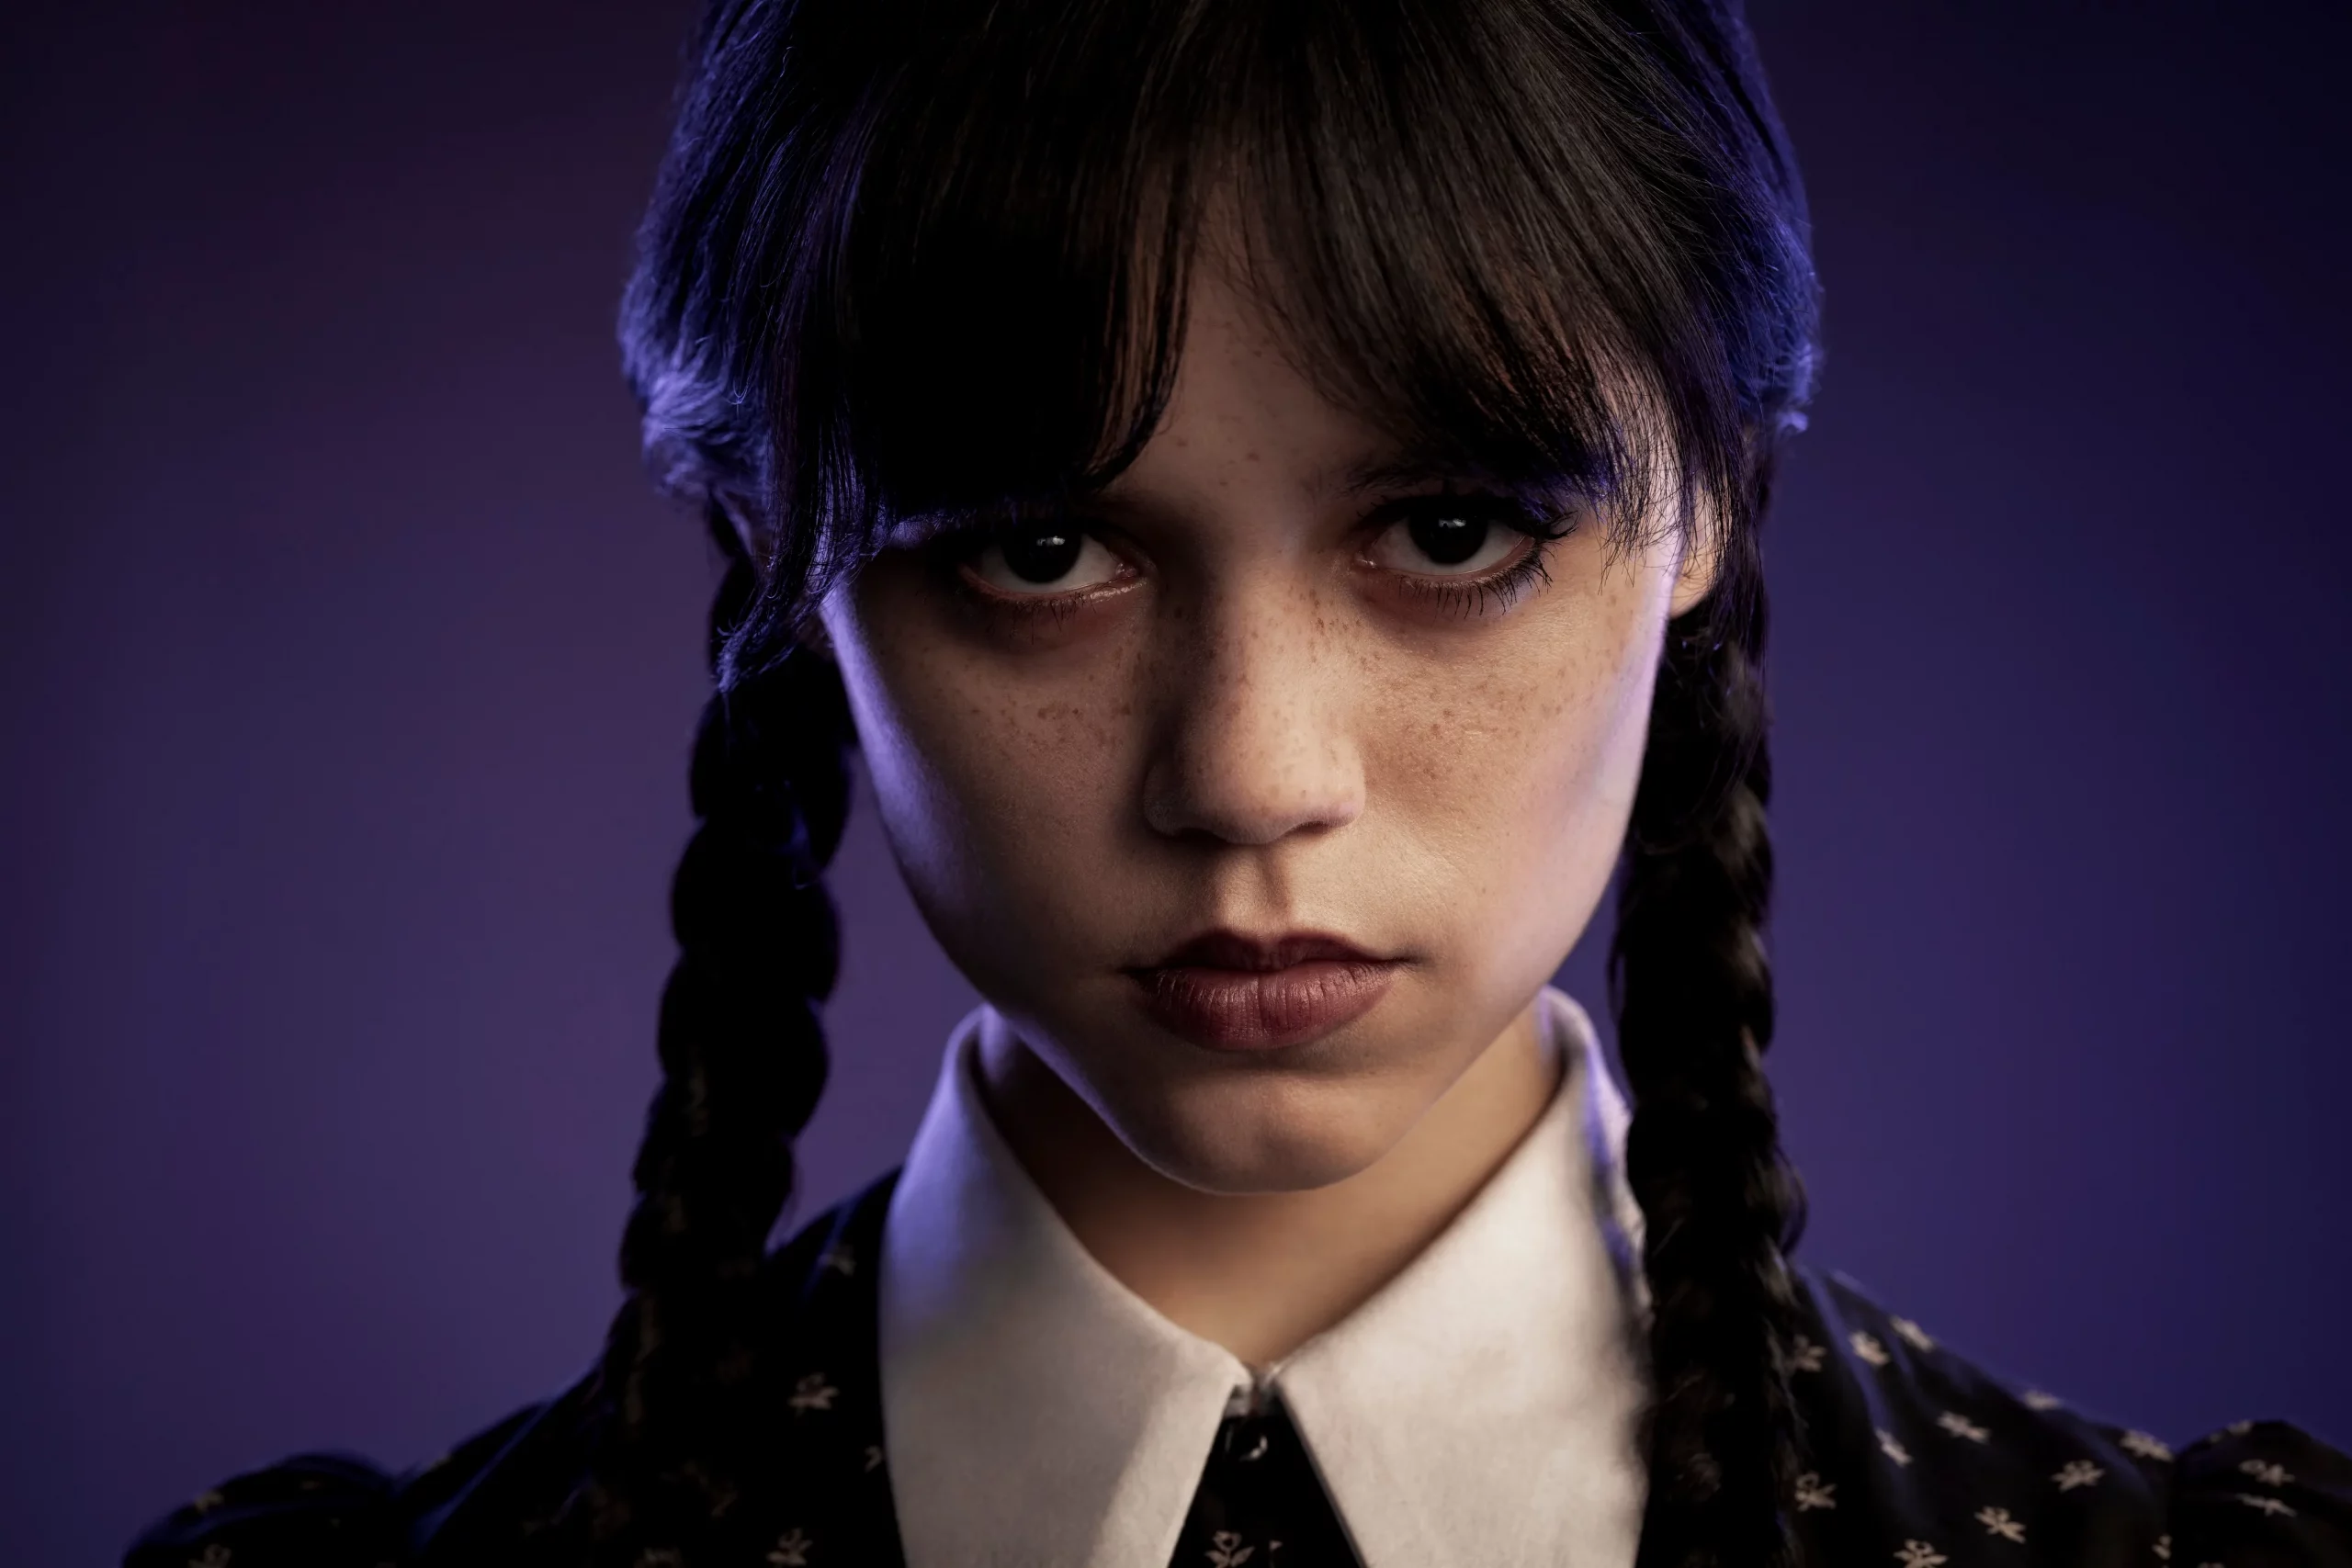 Jenna Ortega as Wednesday Addams - Series and Movies Filmed in Romania